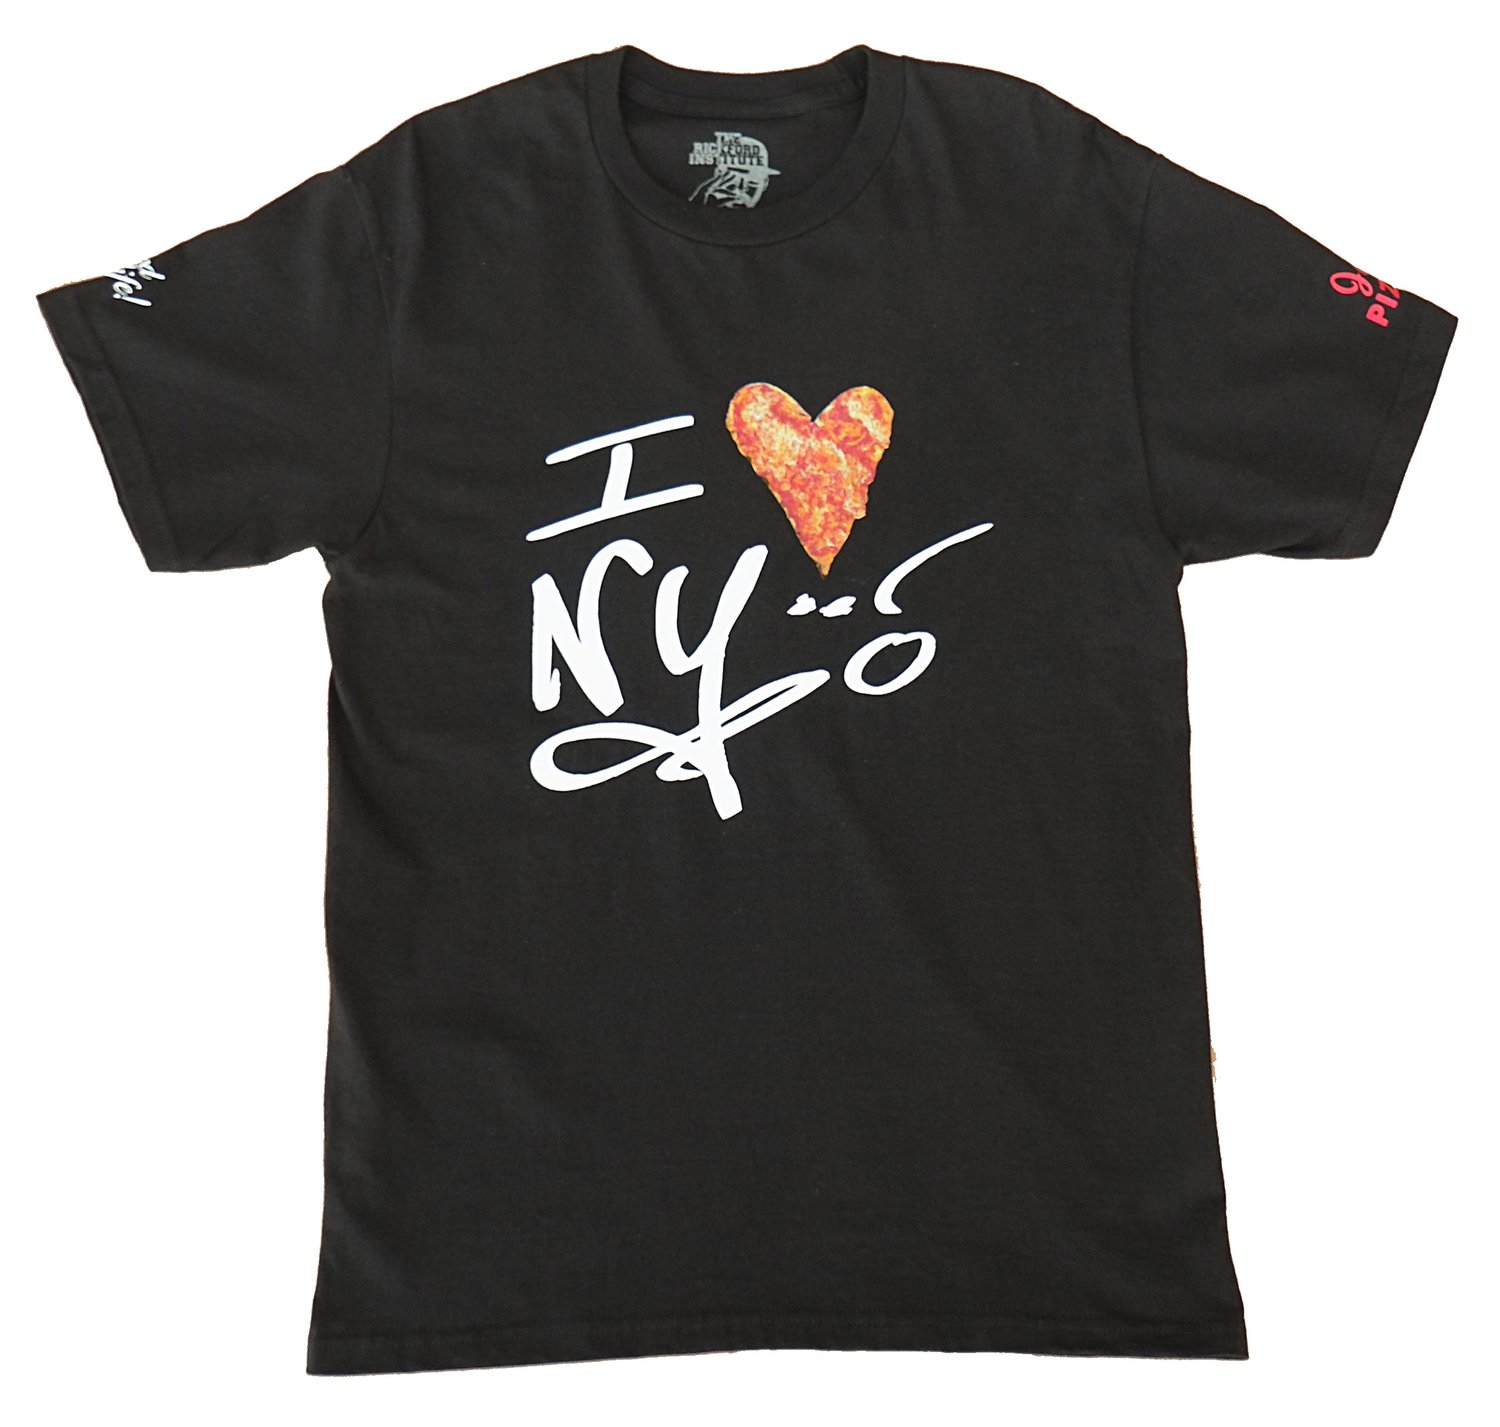 BLK /MED TheGoodLife! X Joes's Pizza X Ricky Powell Collabo T